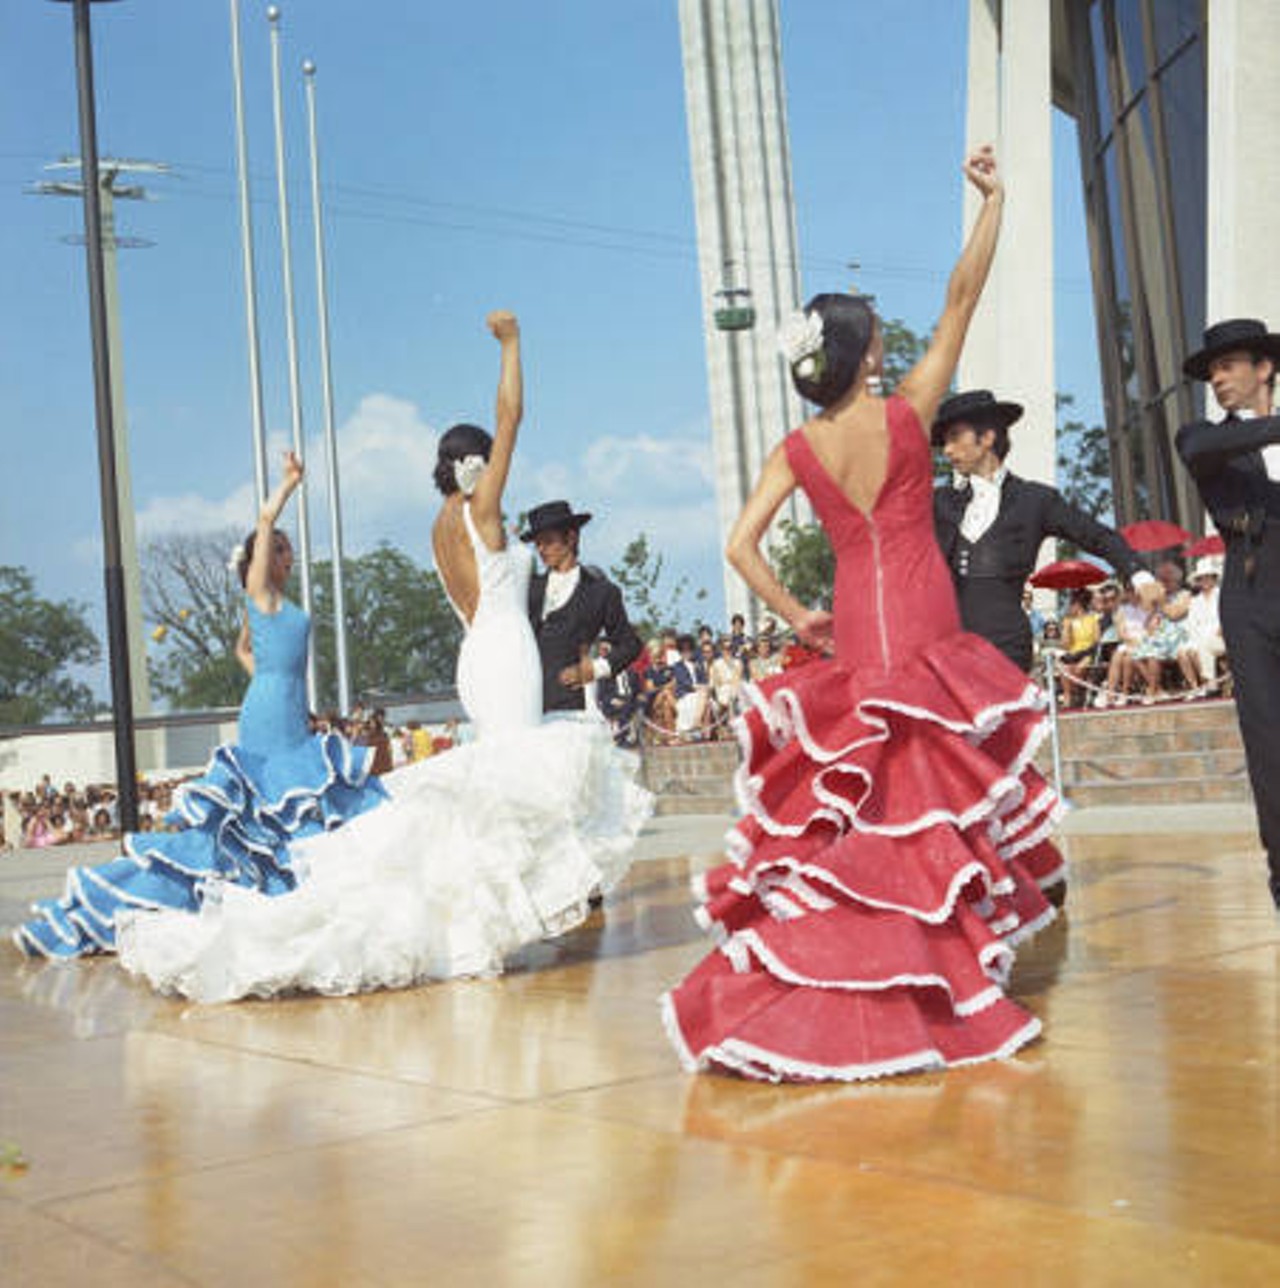 Flamenco Dancers Performing, 1968
This photo, like many others in this list, was taken during the World’s Fair that took place in San Antonio in 1968. The theme of the fair was to celebrate the many cultures present in America.
Photo via Zintgraff Studio Photo Collection